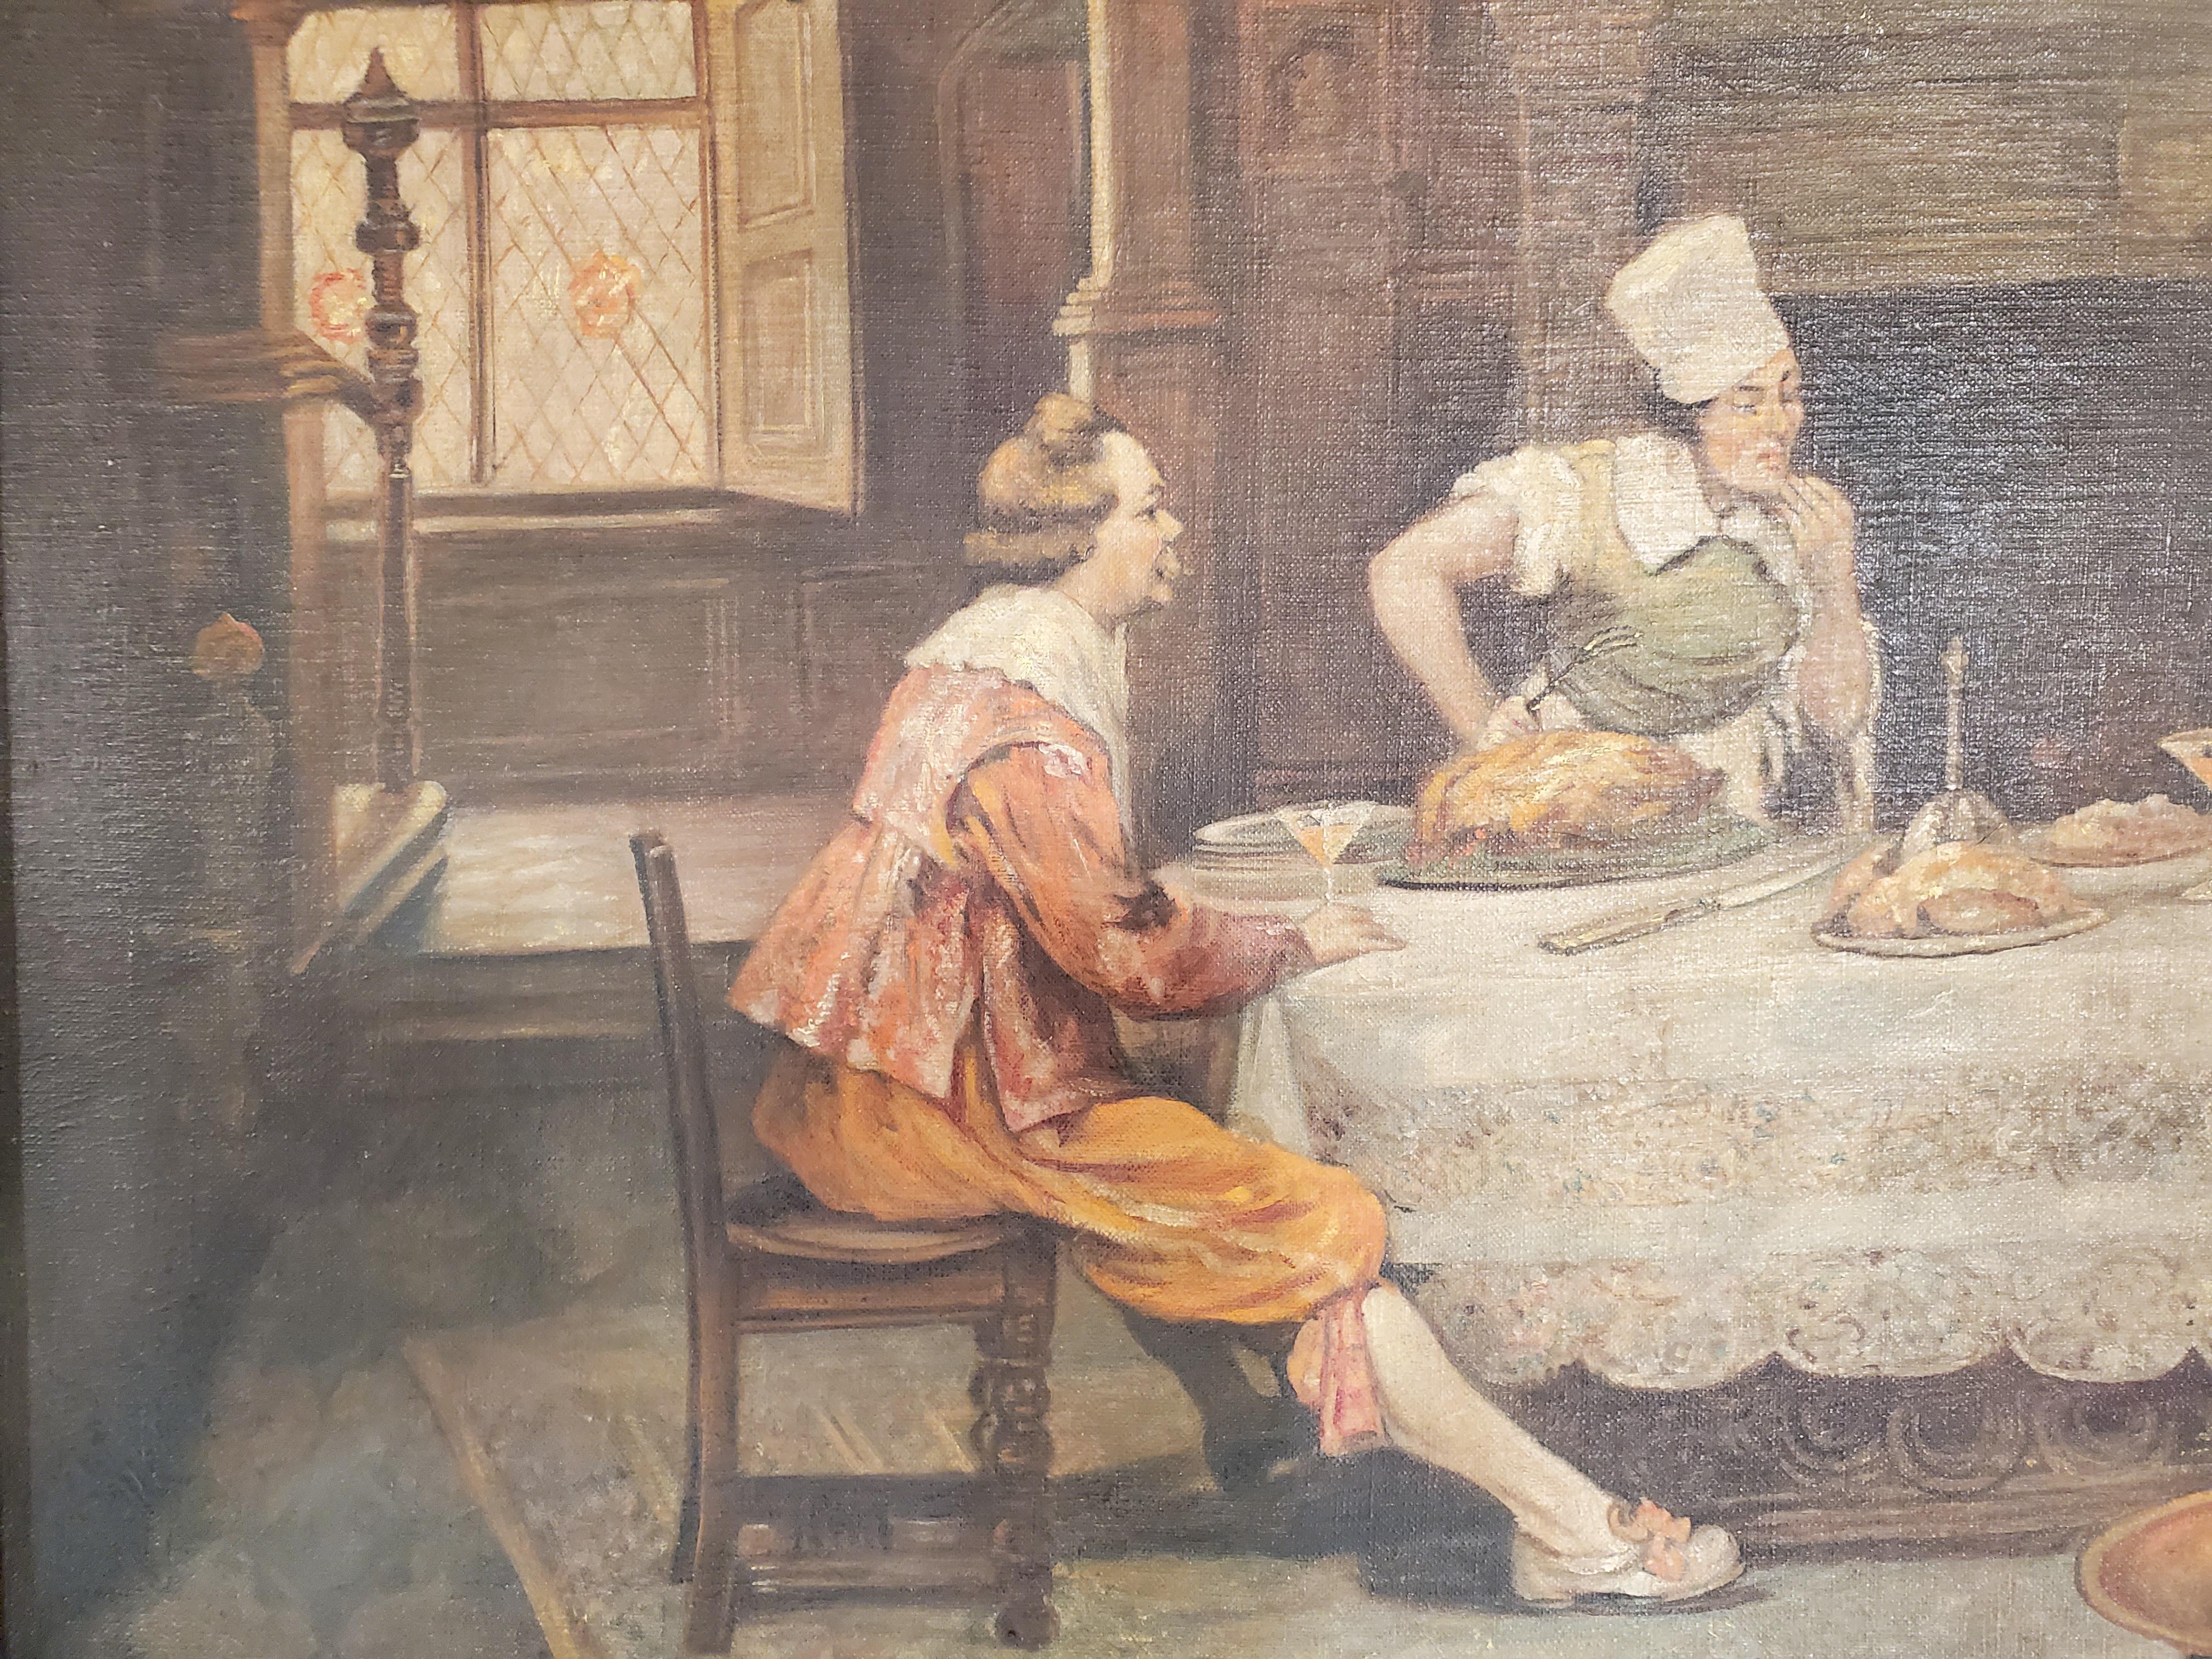 Mid 20th century oil on canvas painting 

Signature on bottom left 

Chef prepares a delicious meal and cocktails for two noble men as they are conversing at the dining table.